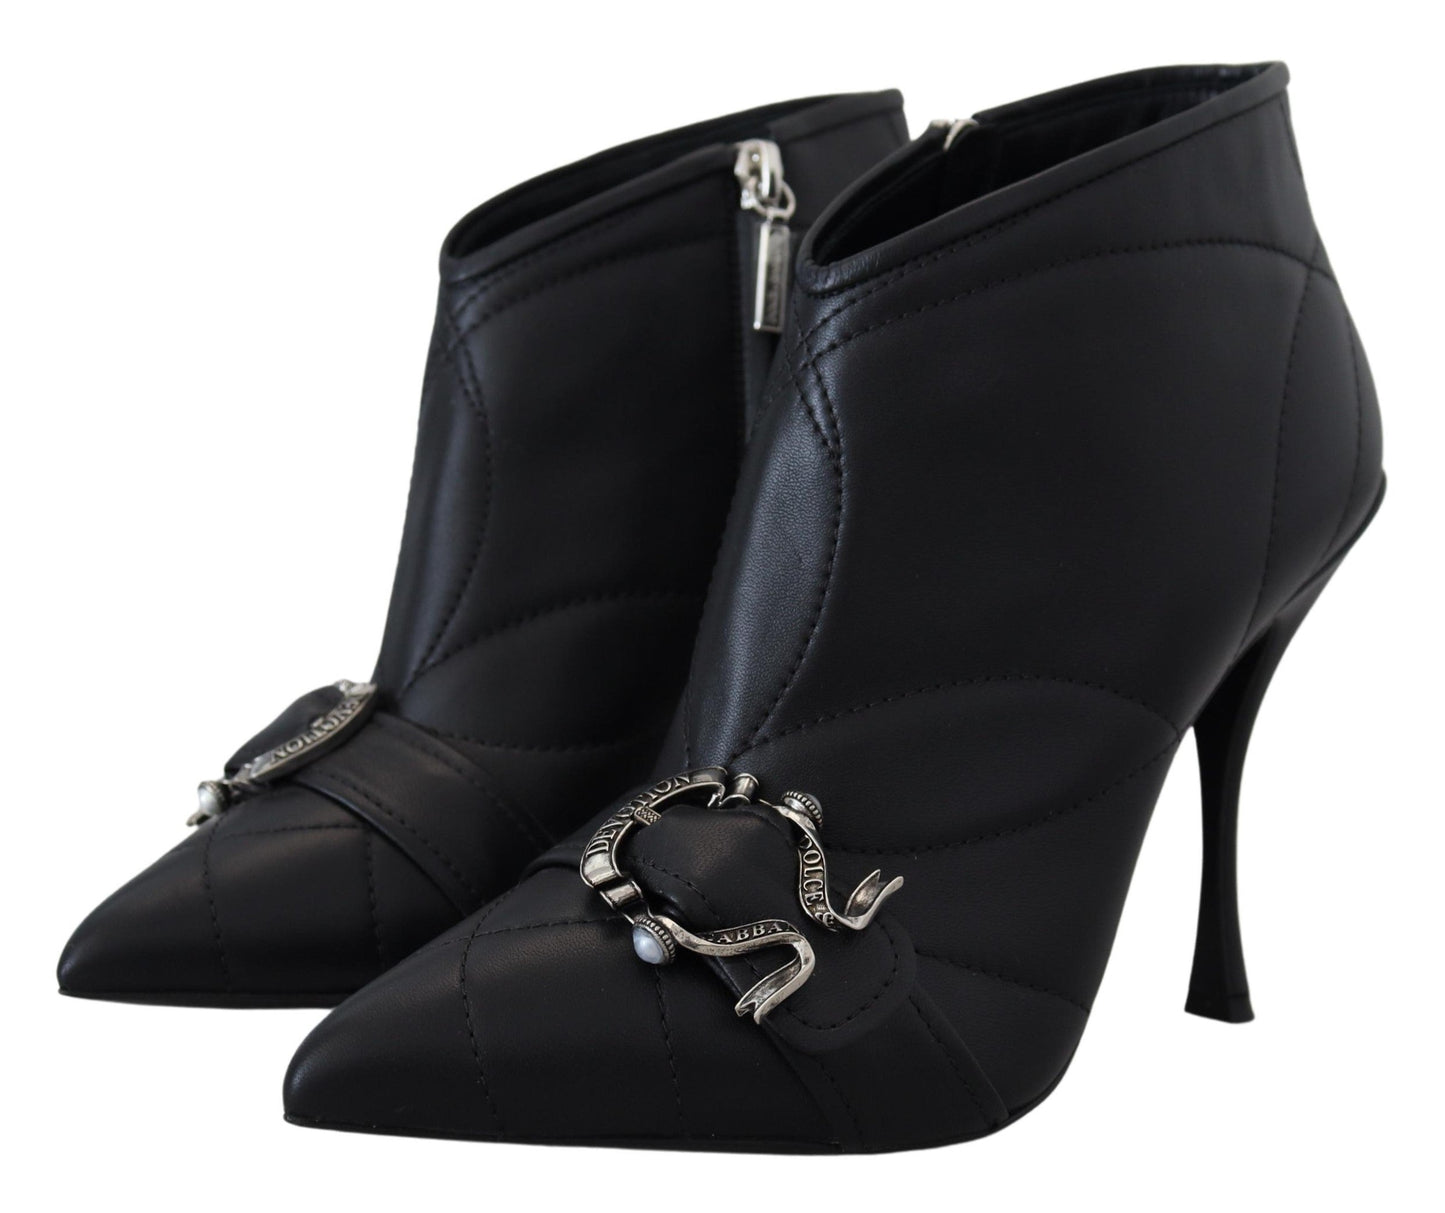 Fashionsarah.com Fashionsarah.com DOLCE & GABBANA Quilted Buckled Ankle Boots Shoes